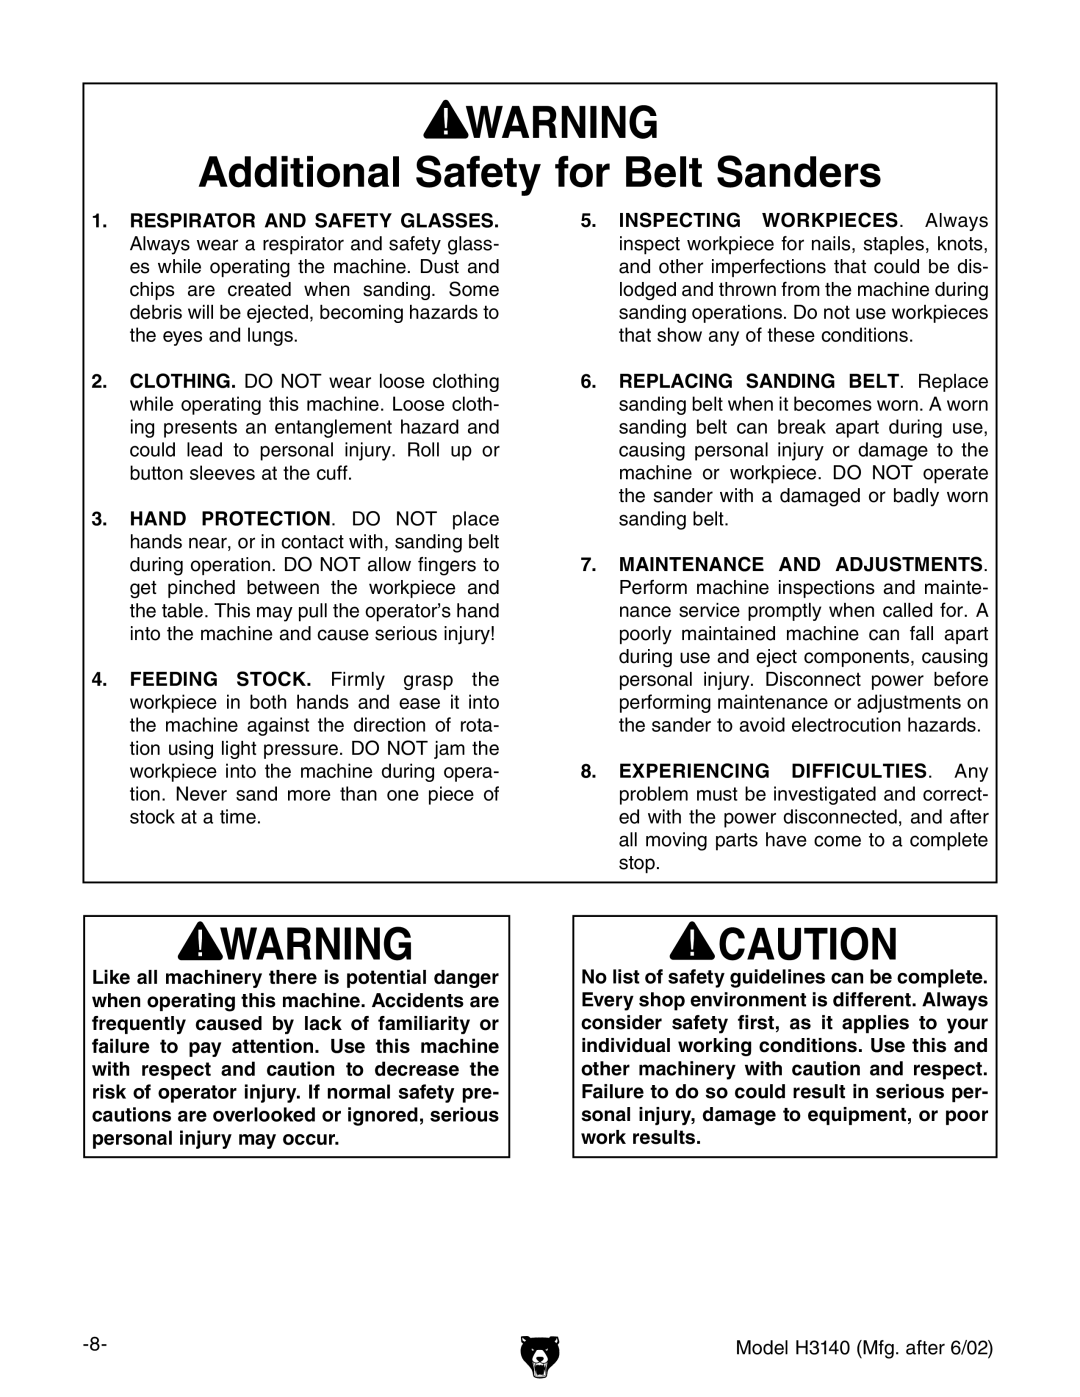 Grizzly H3140 owner manual Additional Safety for Belt Sanders, Respirator and Safety Glasses 